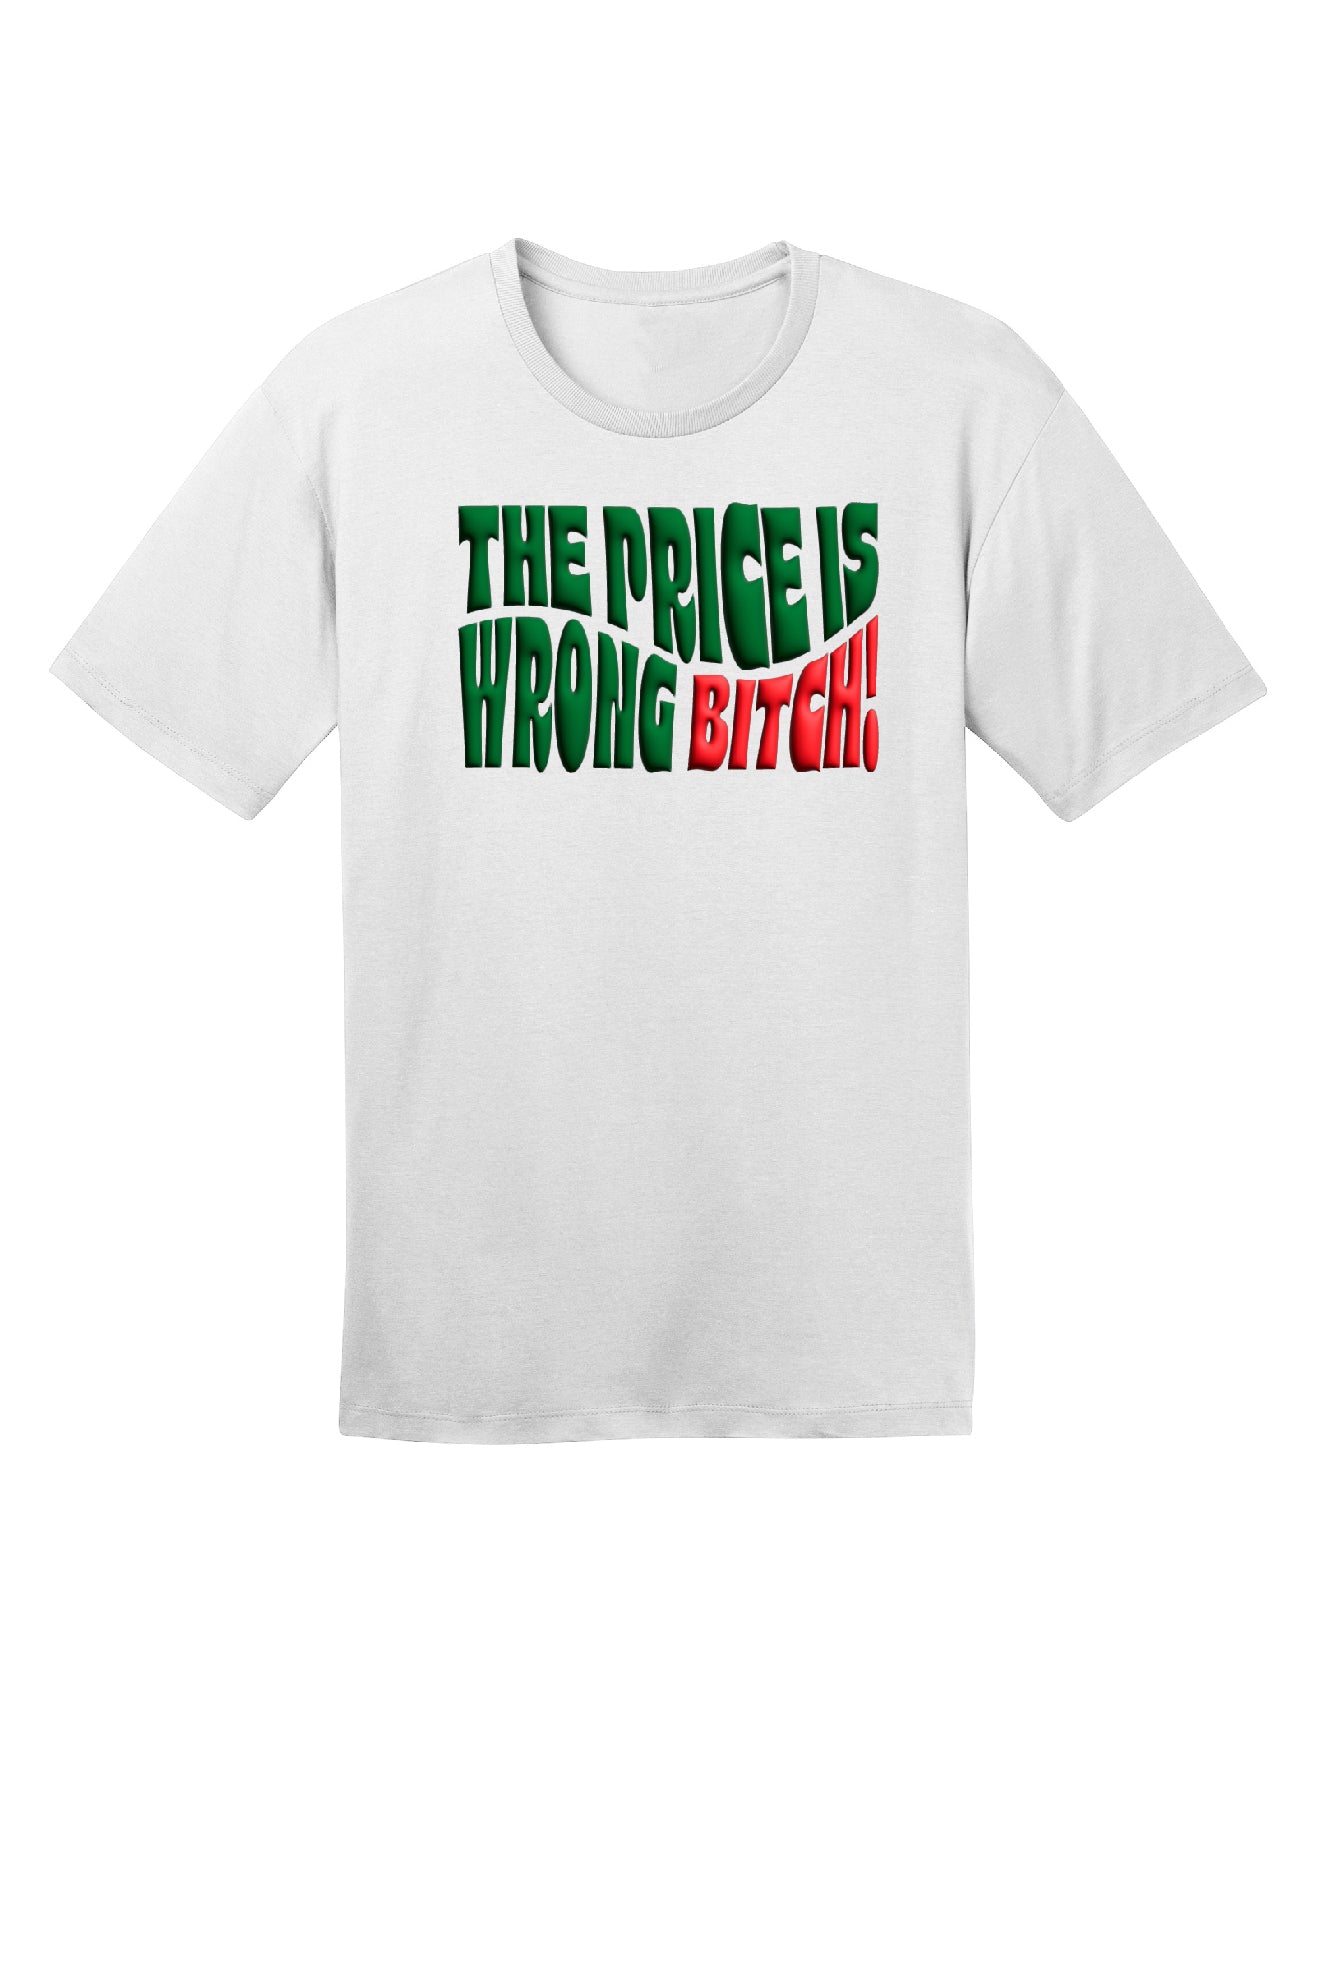 The Price is Wrong Bitch! Tee